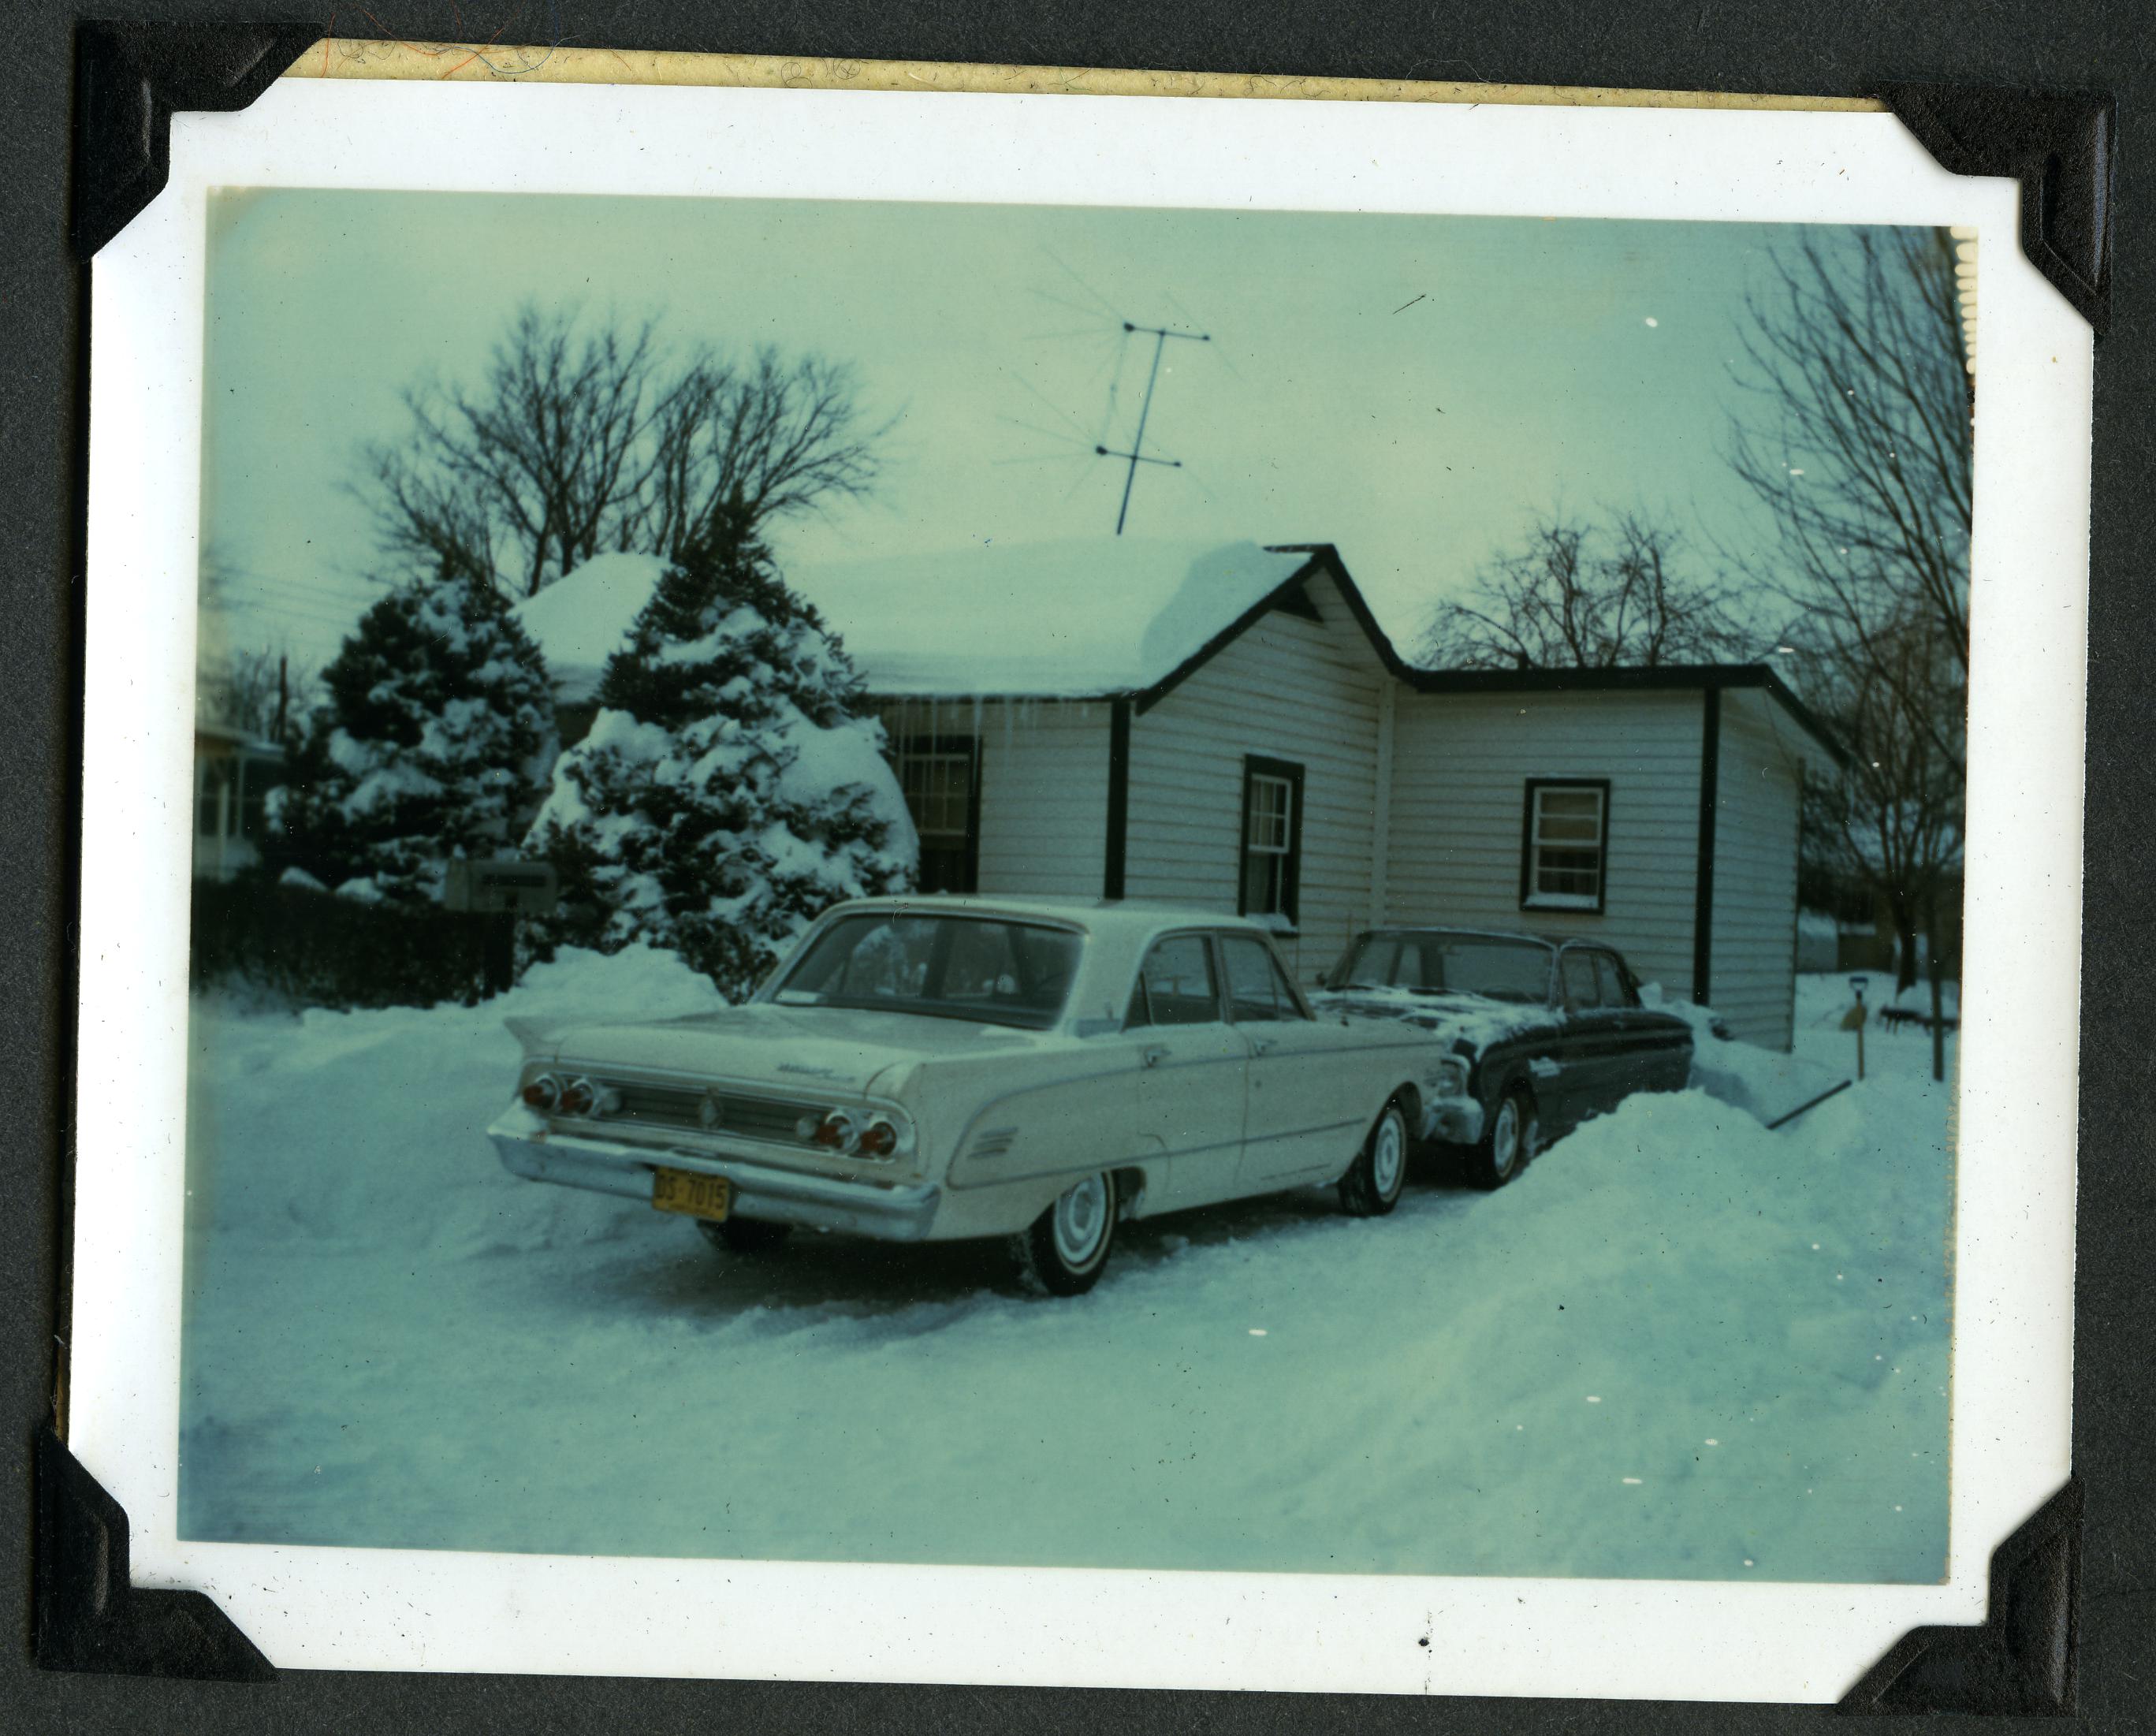 Edwards Home in the snow with car